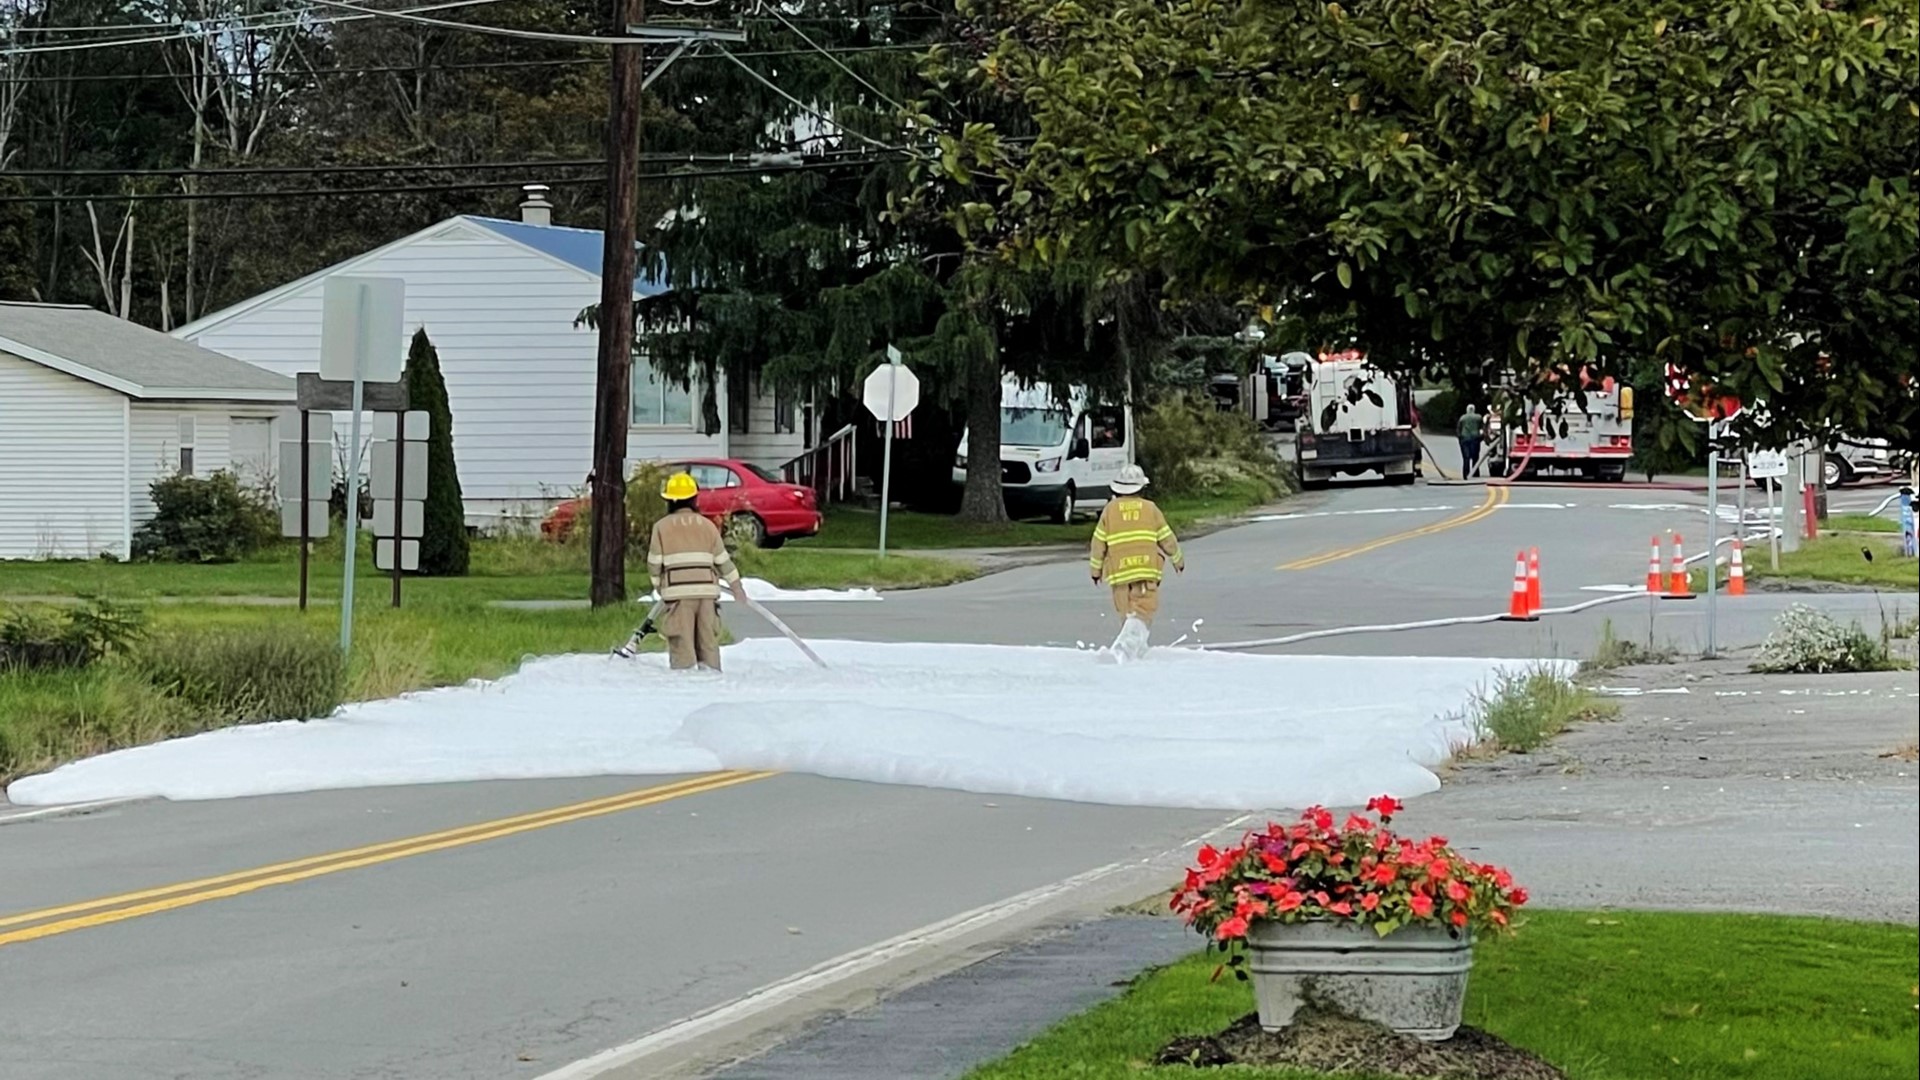 Fire crews used foam and absorbent material to contain the spill near a gas station in South Montrose.